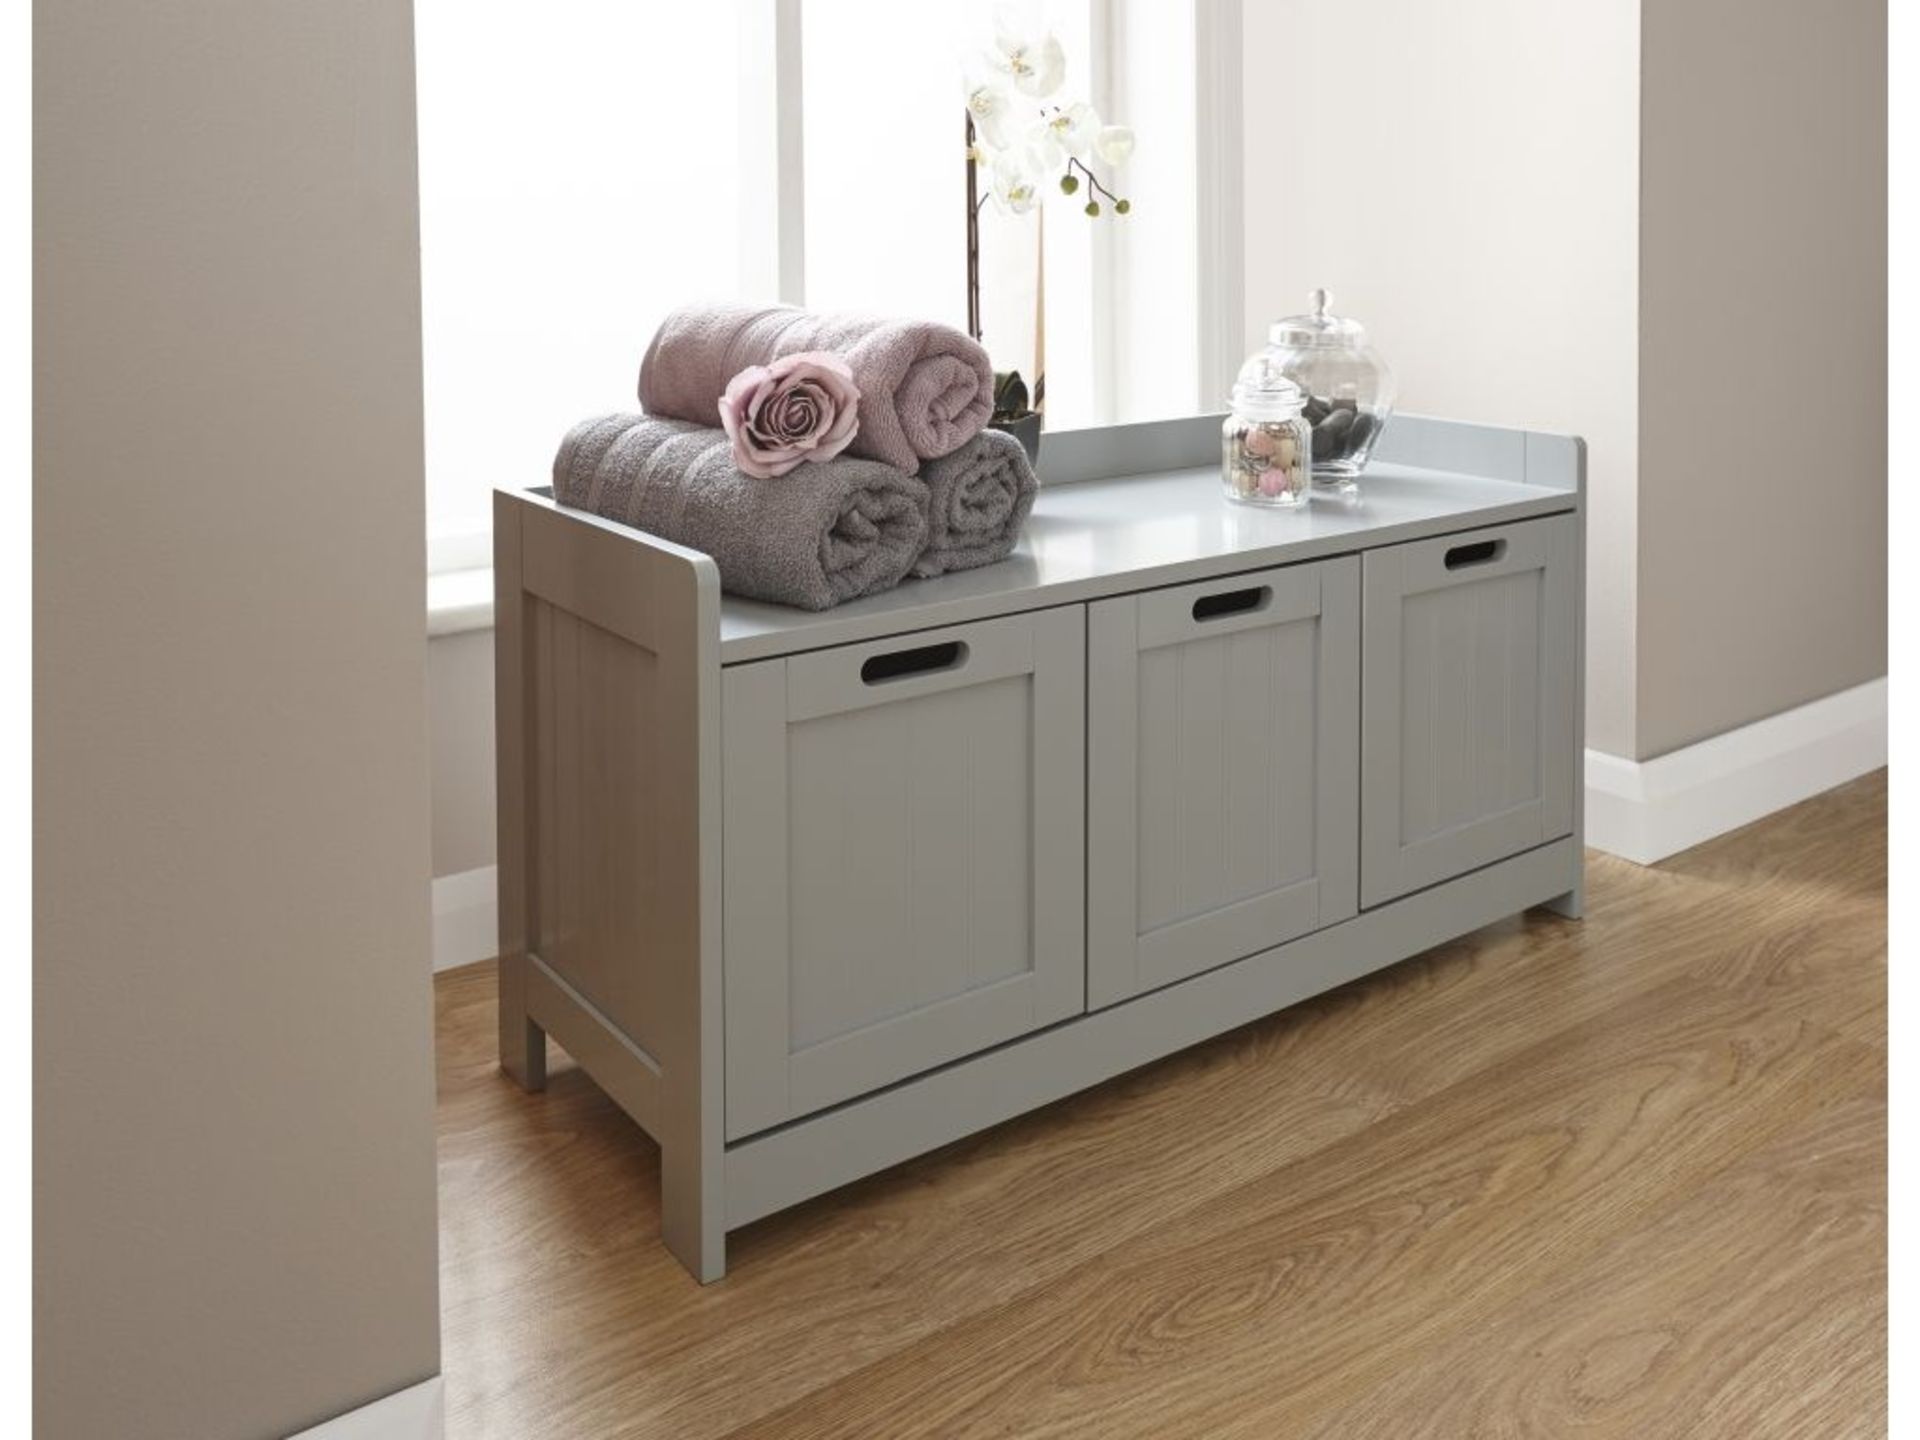 90 x 45cm Free-Standing Cabinet - RRP £72.99